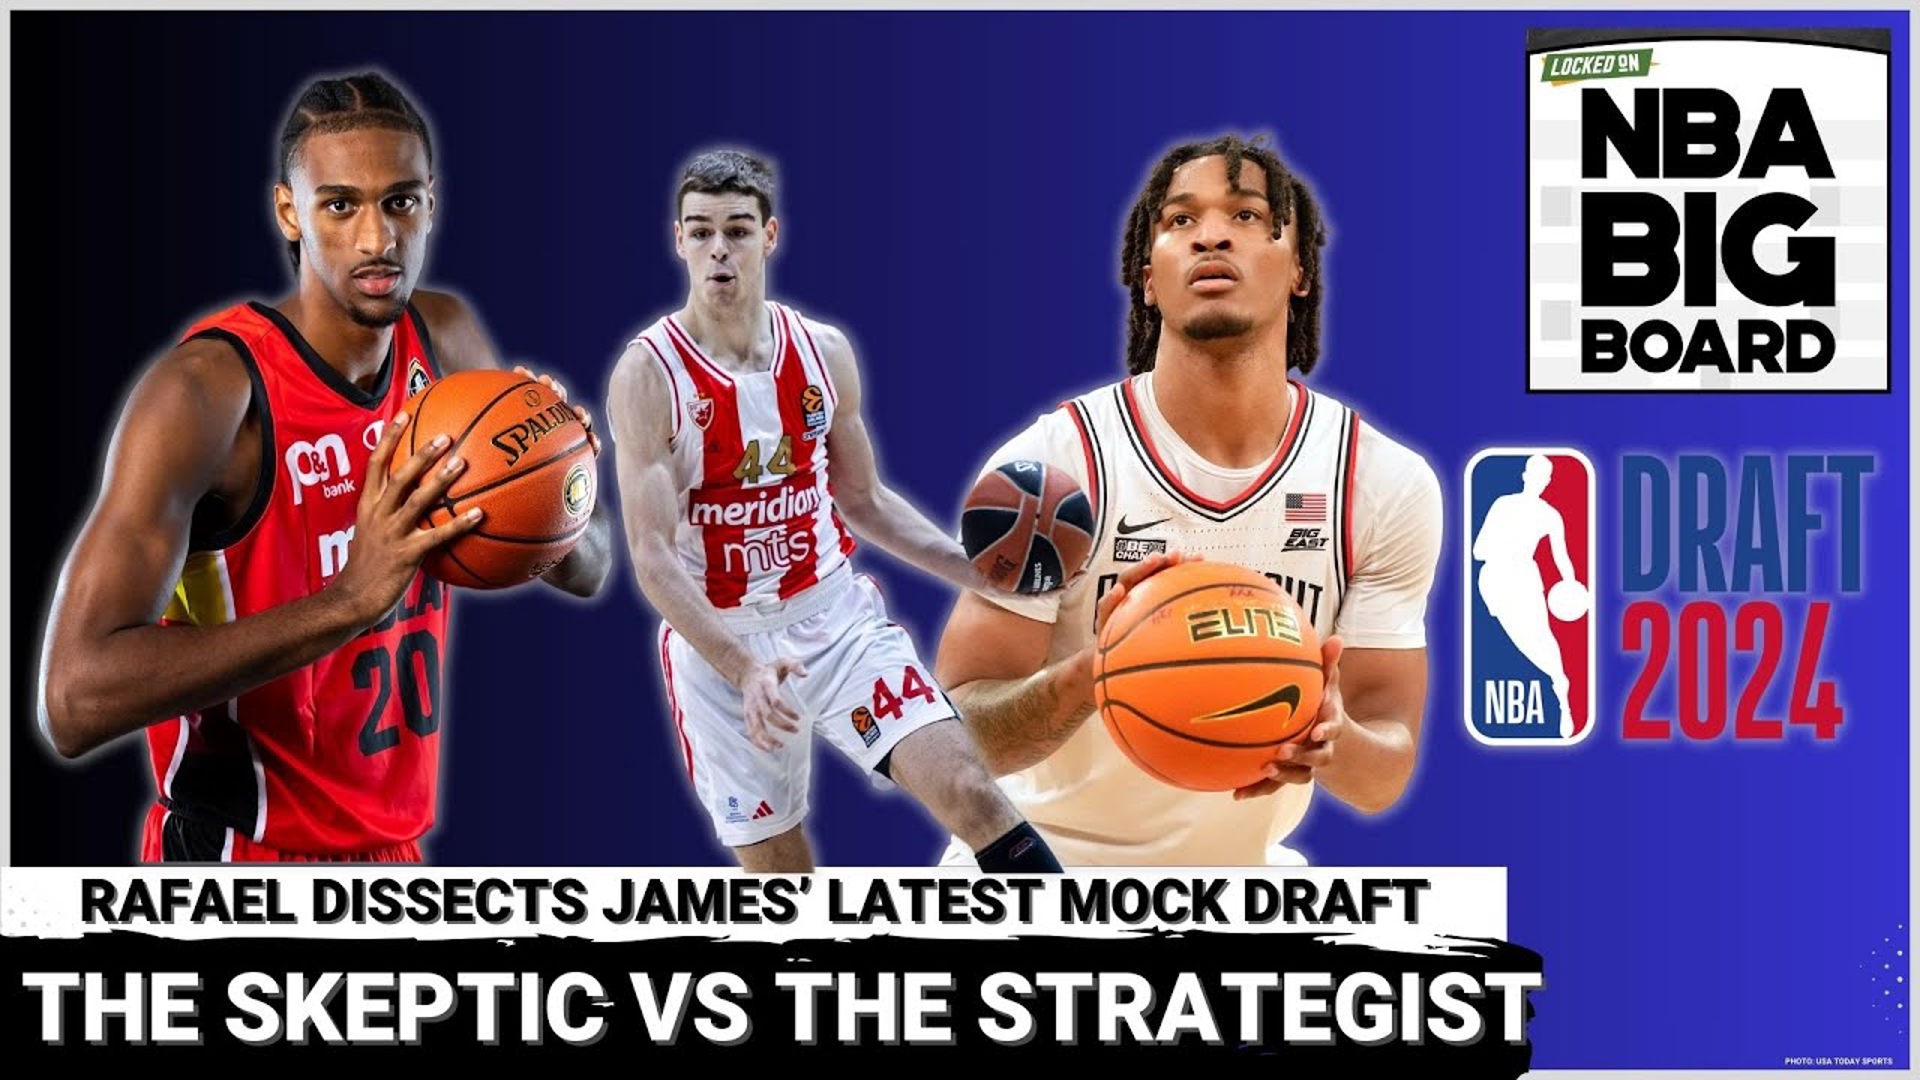 In this episode of the Locked On NBA Big Board podcast, Rafael and James Barlowe delve into James’ latest Mock Draft.